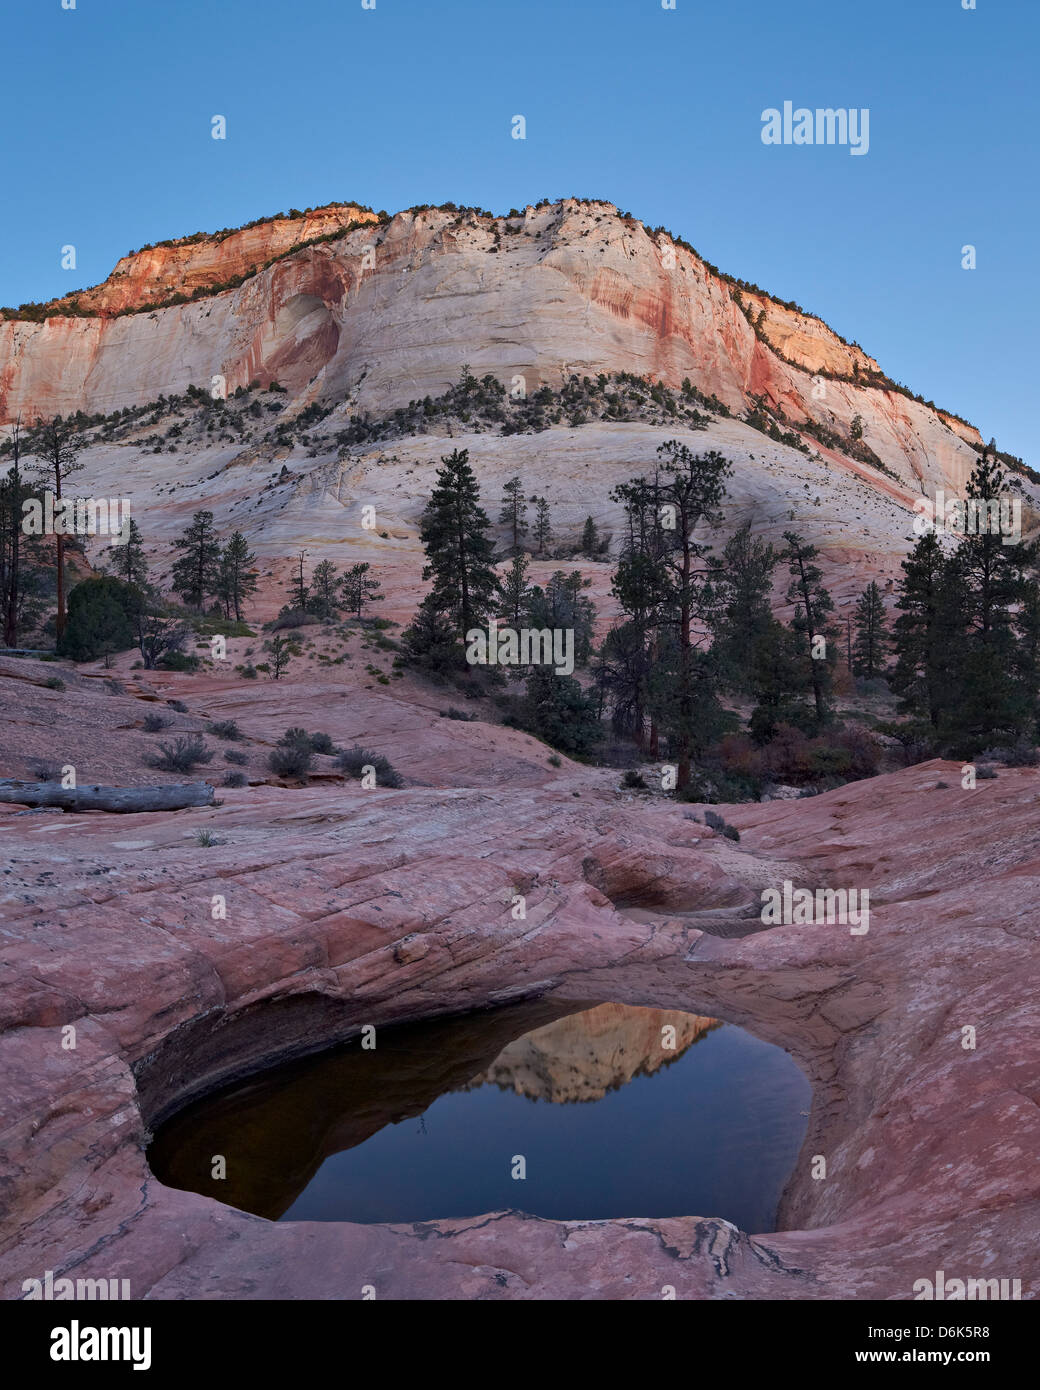 Pool in slick rock at dawn, Zion National Park, Utah, United States of America, North America Stock Photo